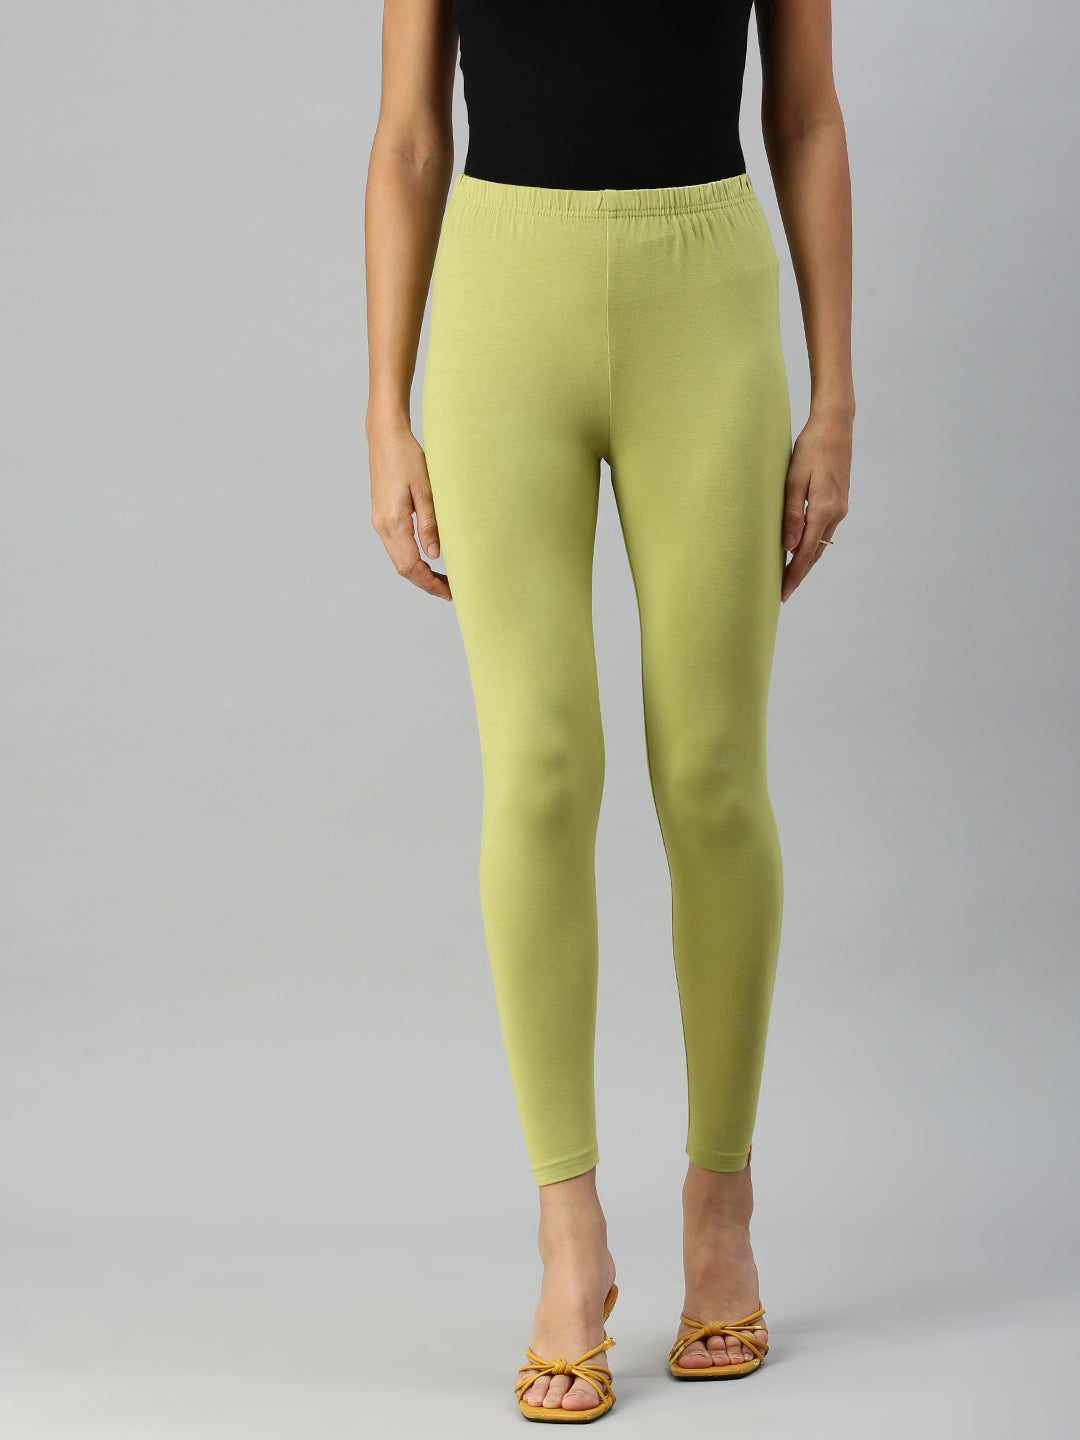 Prisma's Frenchwine Cuff Length Leggings for Comfort and Style